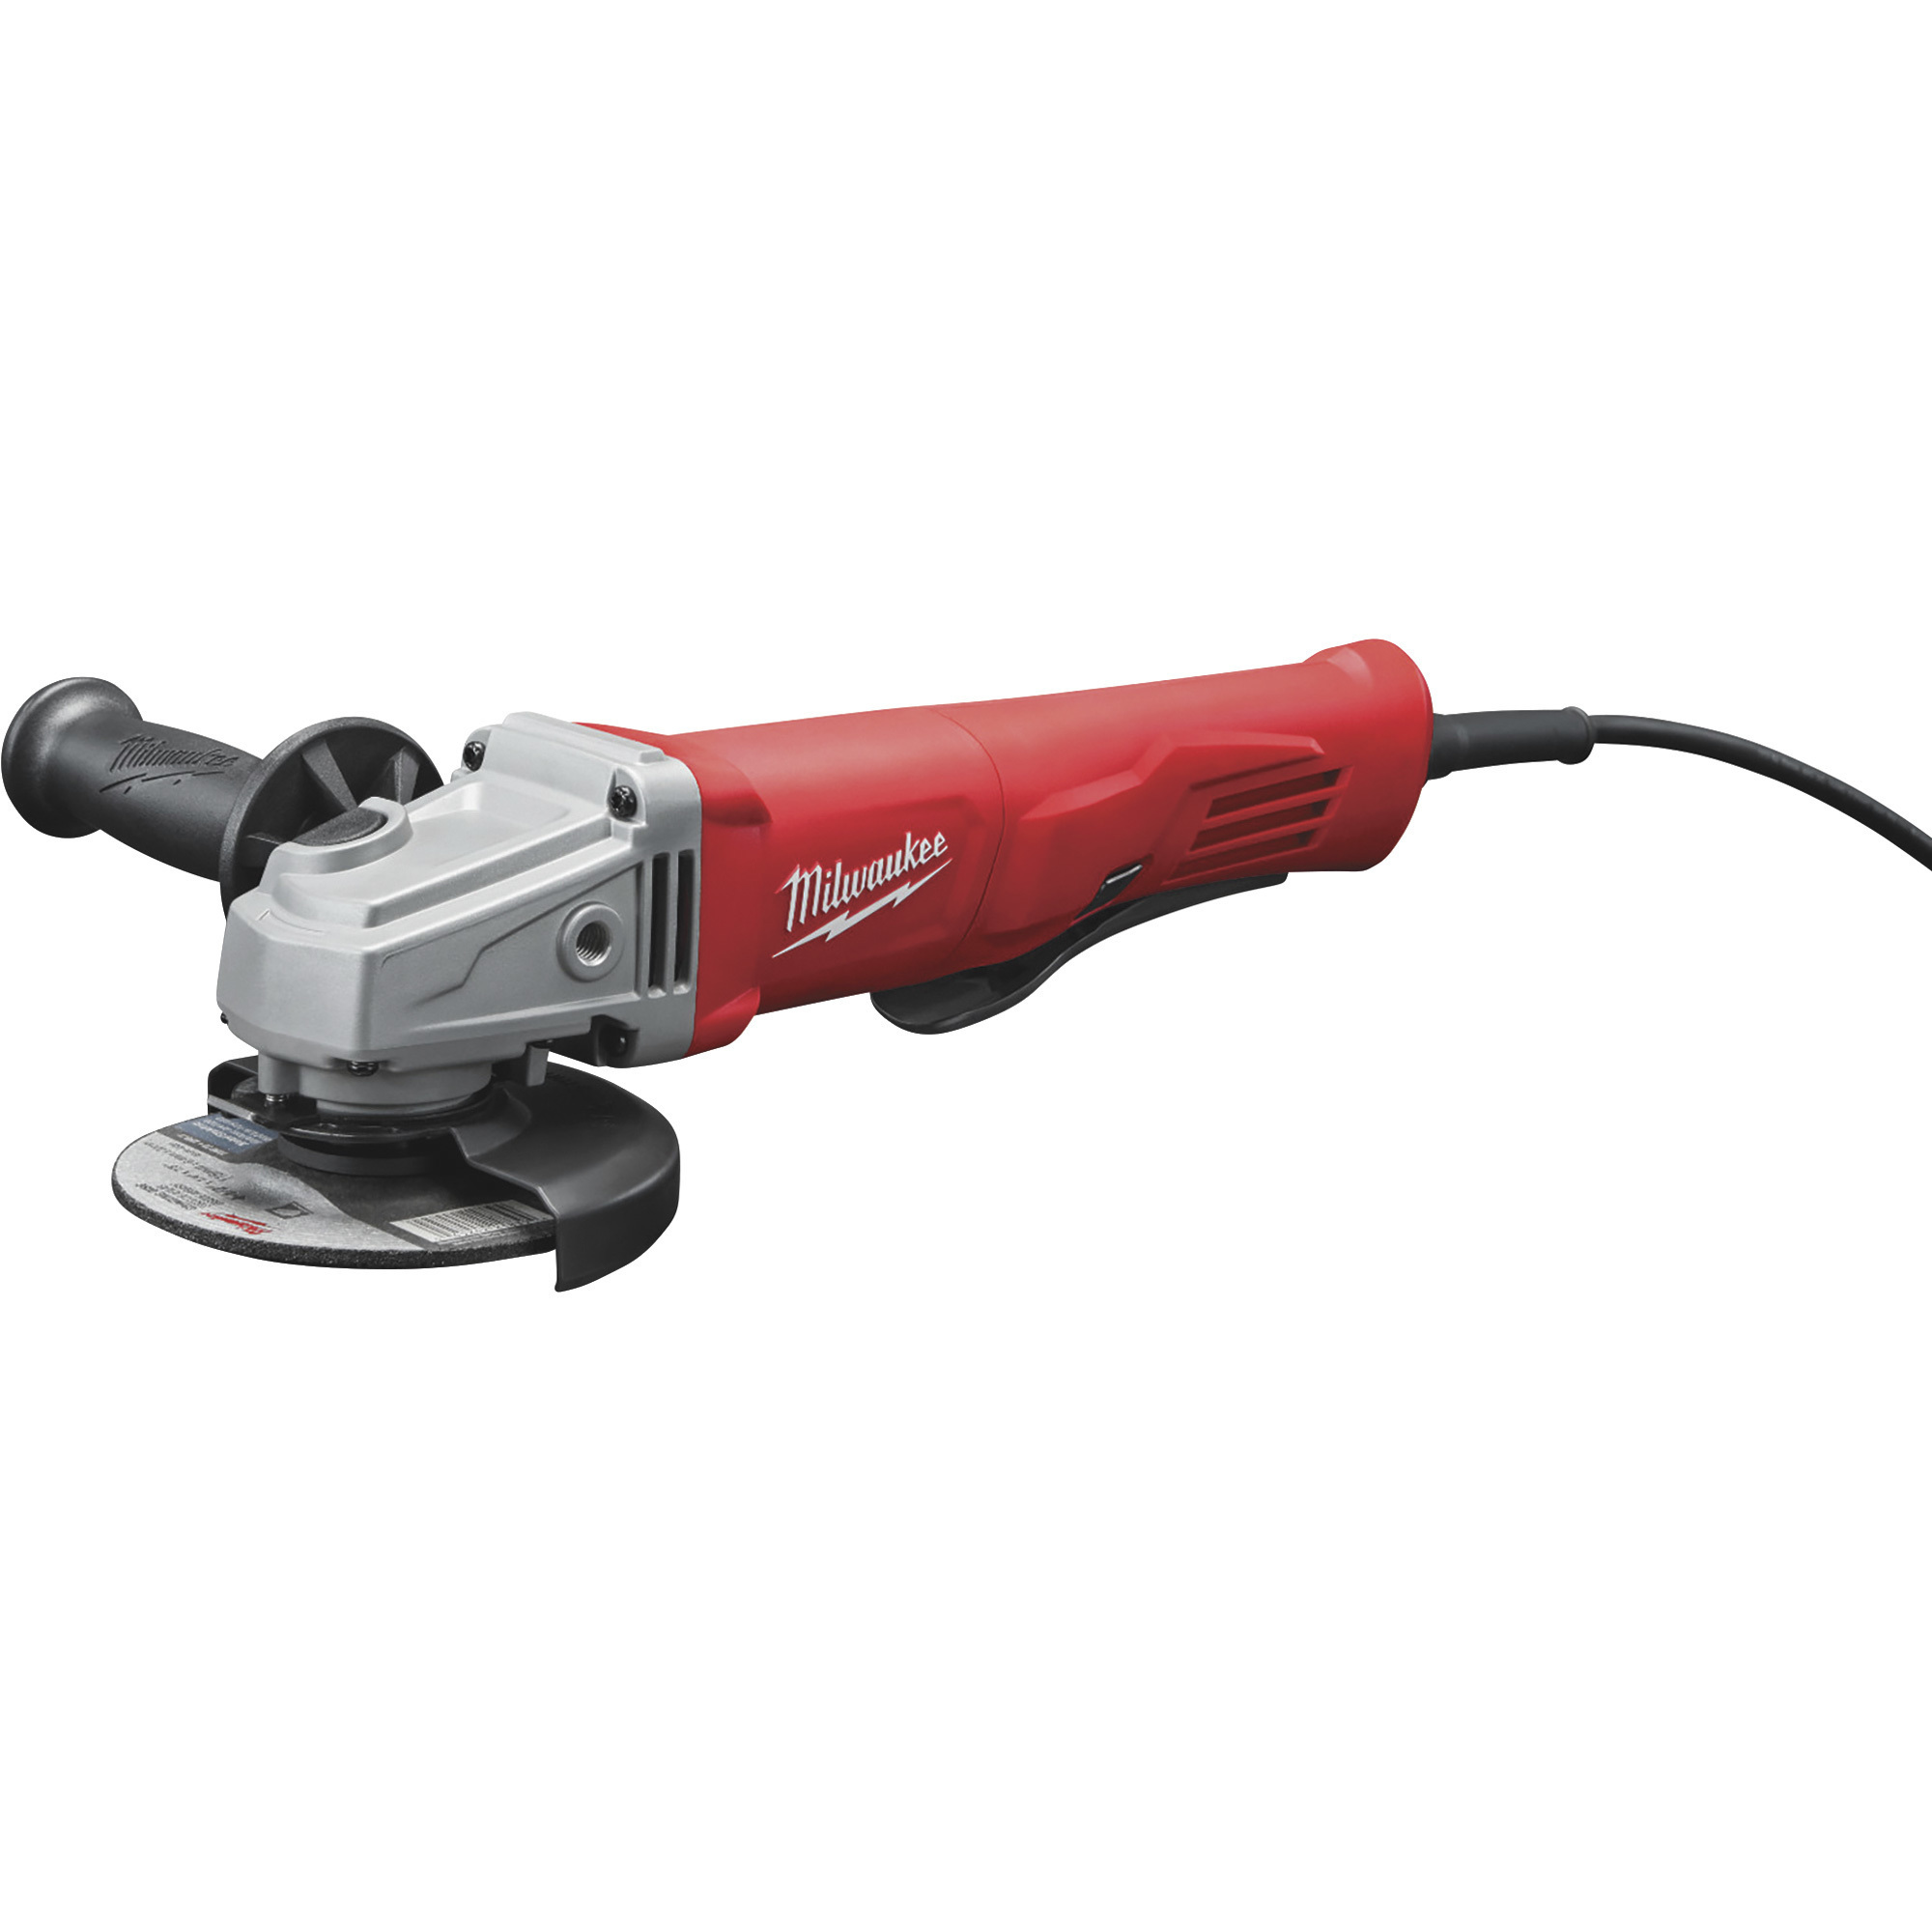 Milwaukee 1/2in. Small Angle Grinder — 11 Amp, 11,000 RPM, Paddle,  No-Lock, Model# 6141-31 Northern Tool